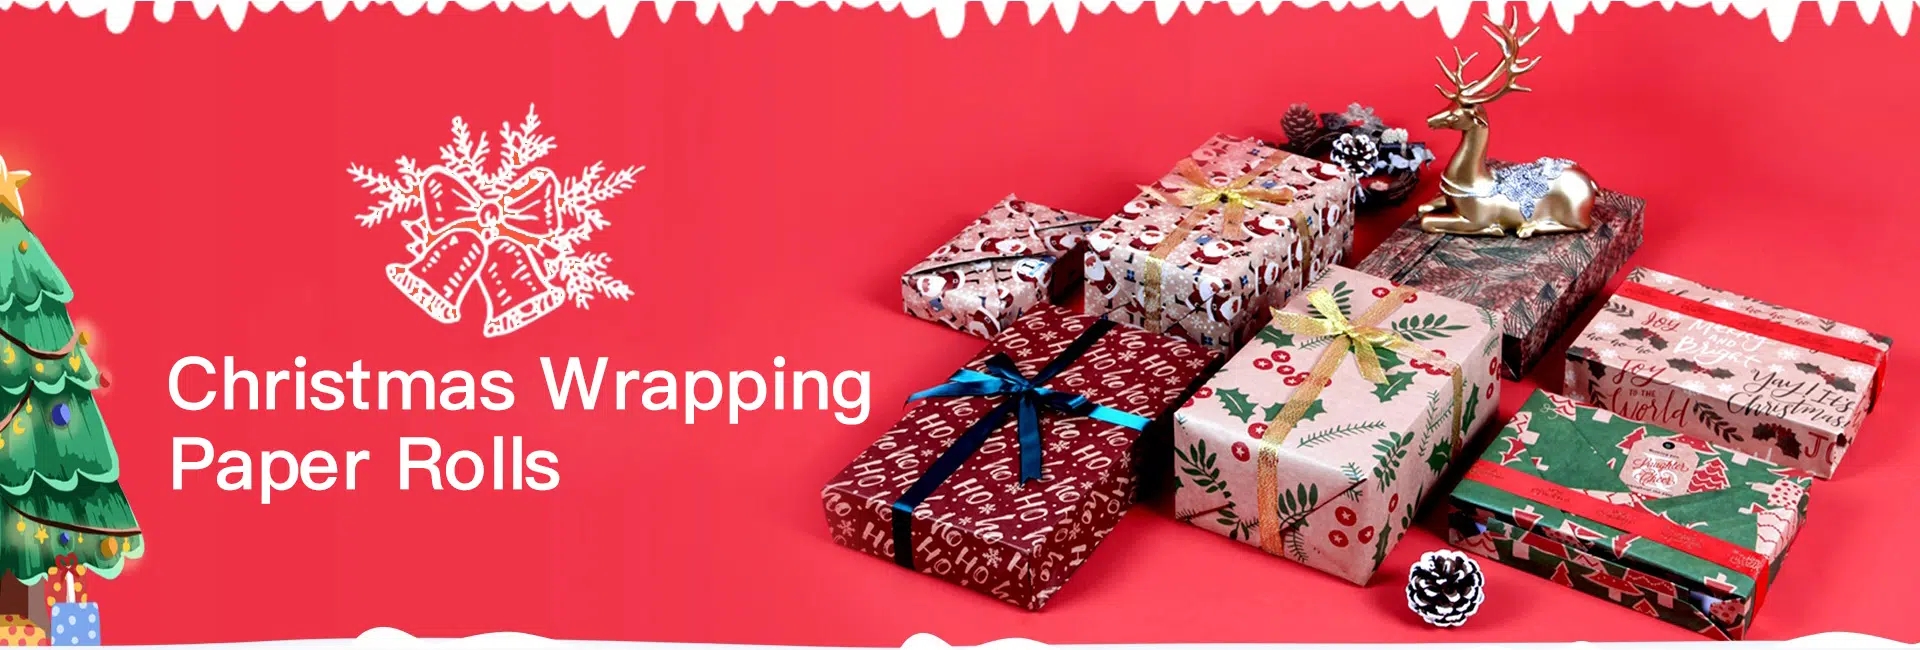 christmas-wrapping-paper-rolls-1.jpg.webp